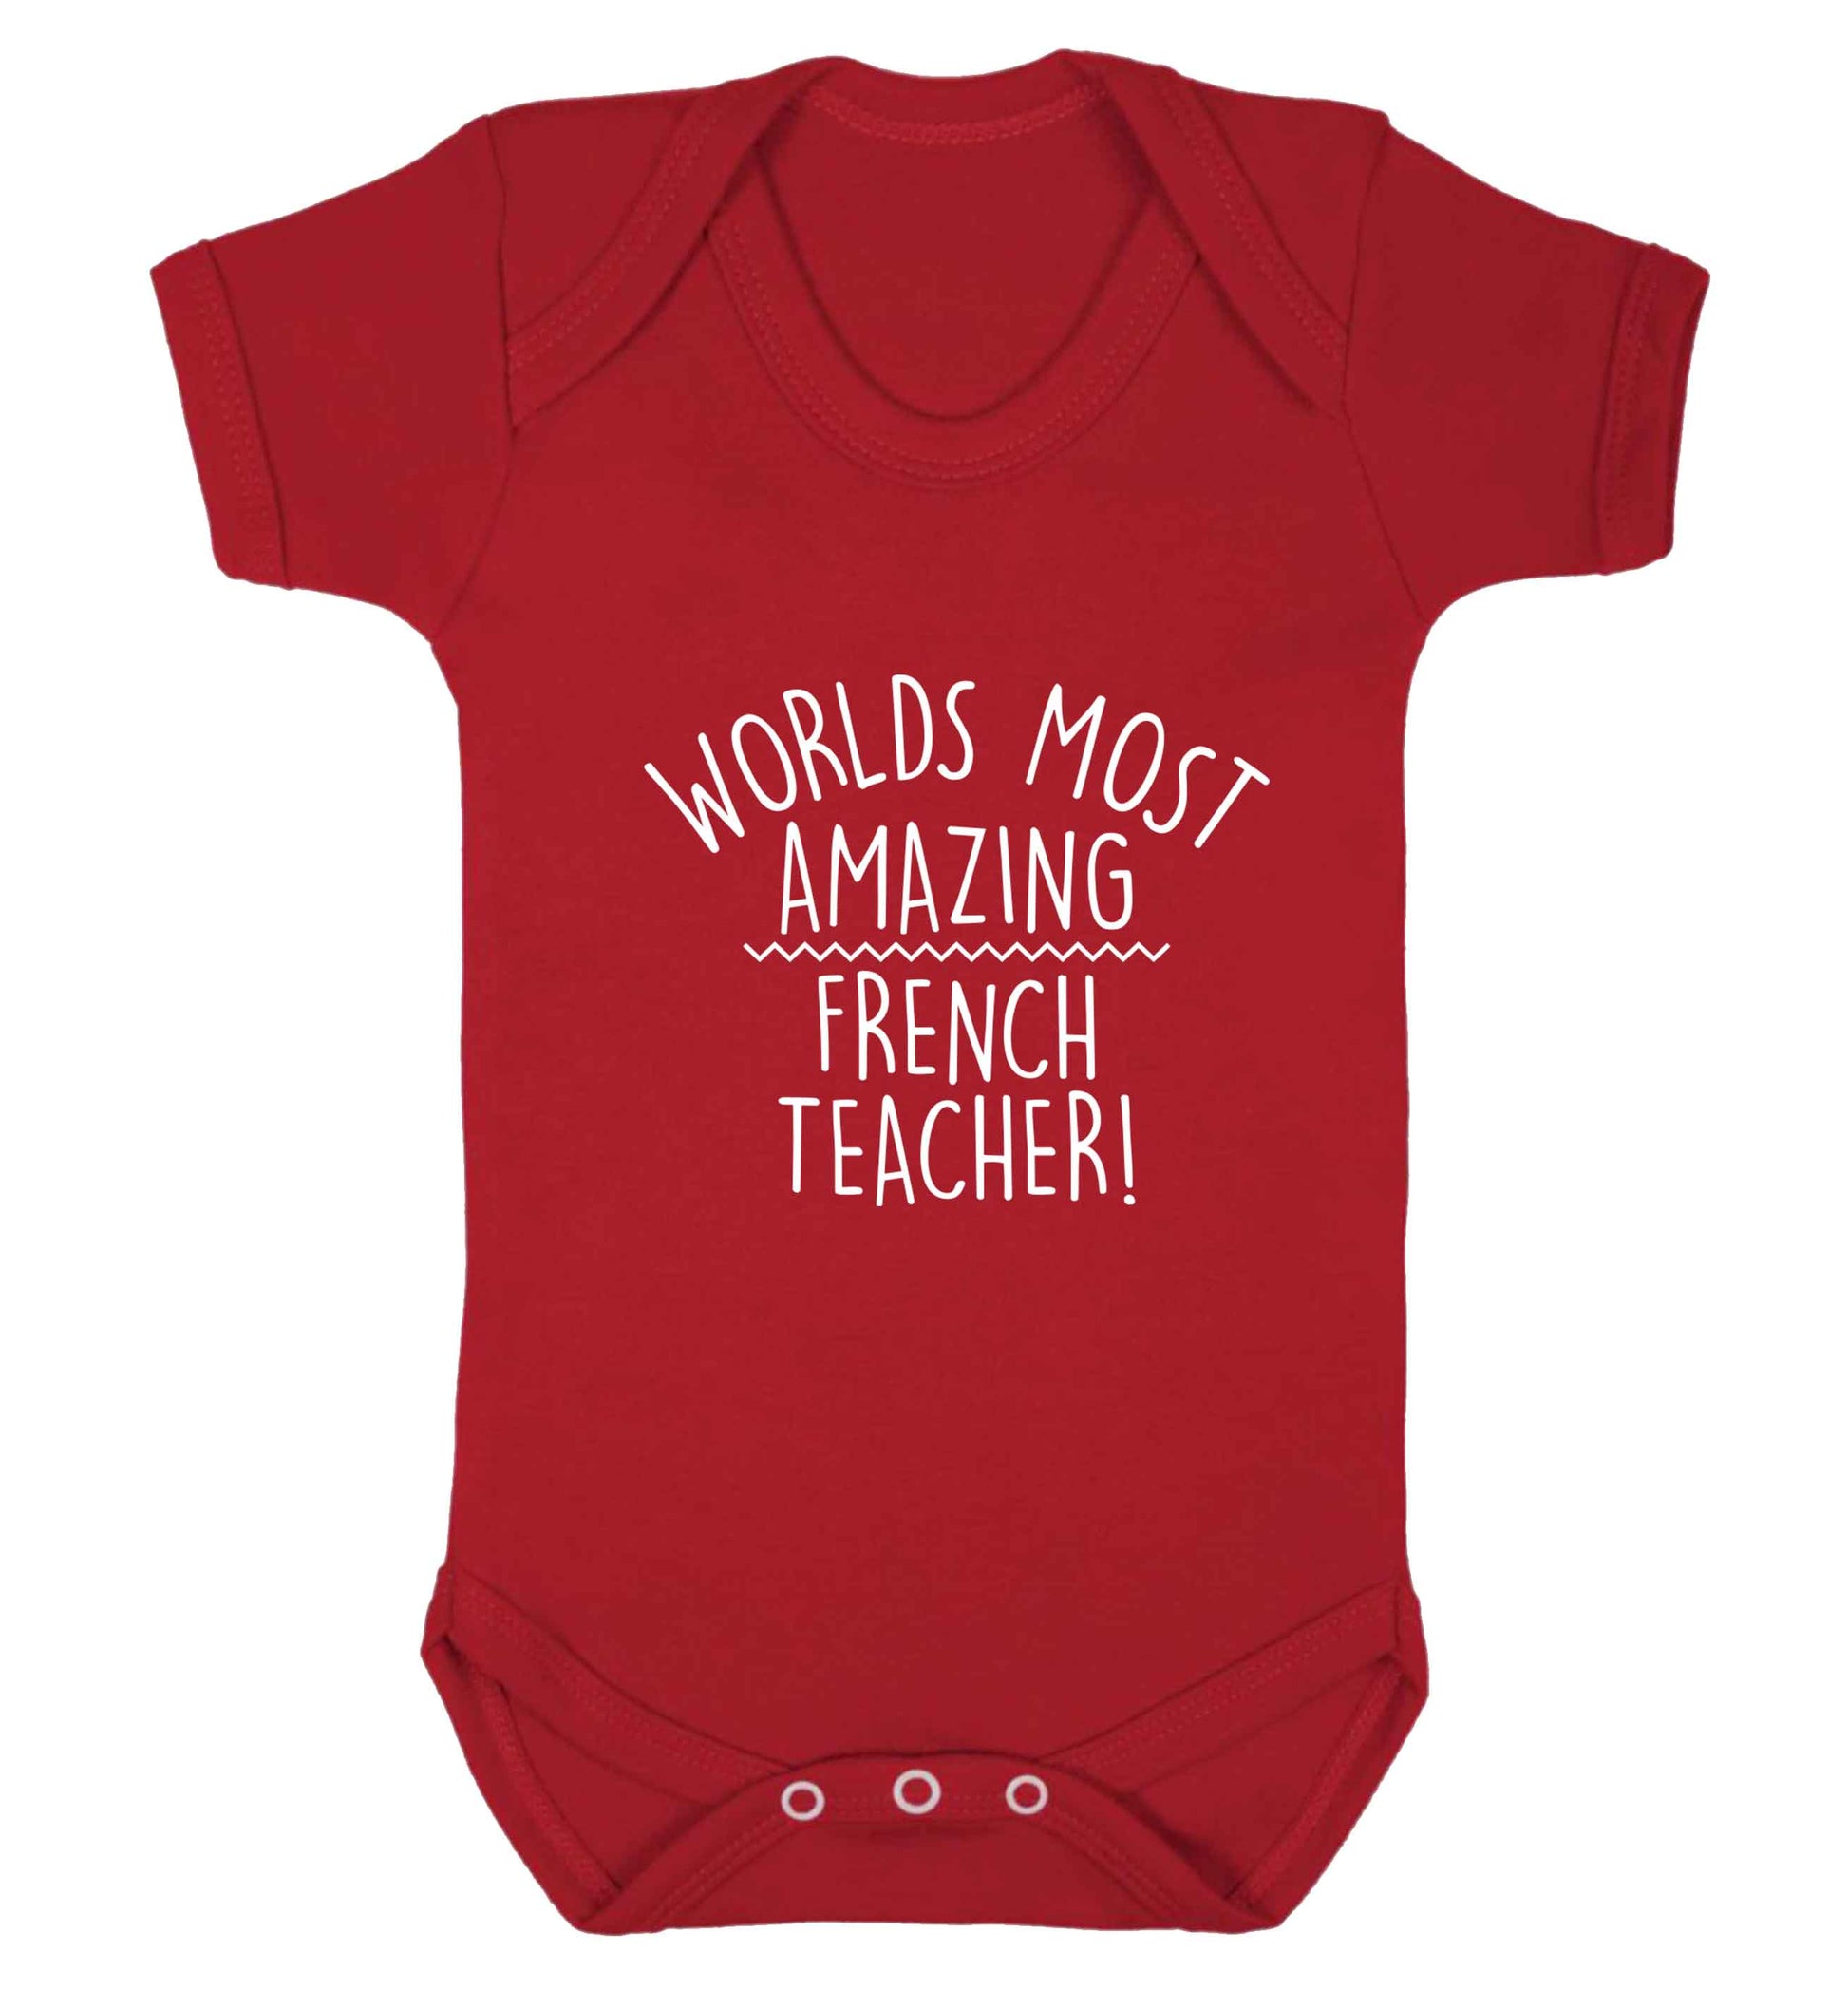 Worlds most amazing French teacher baby vest red 18-24 months